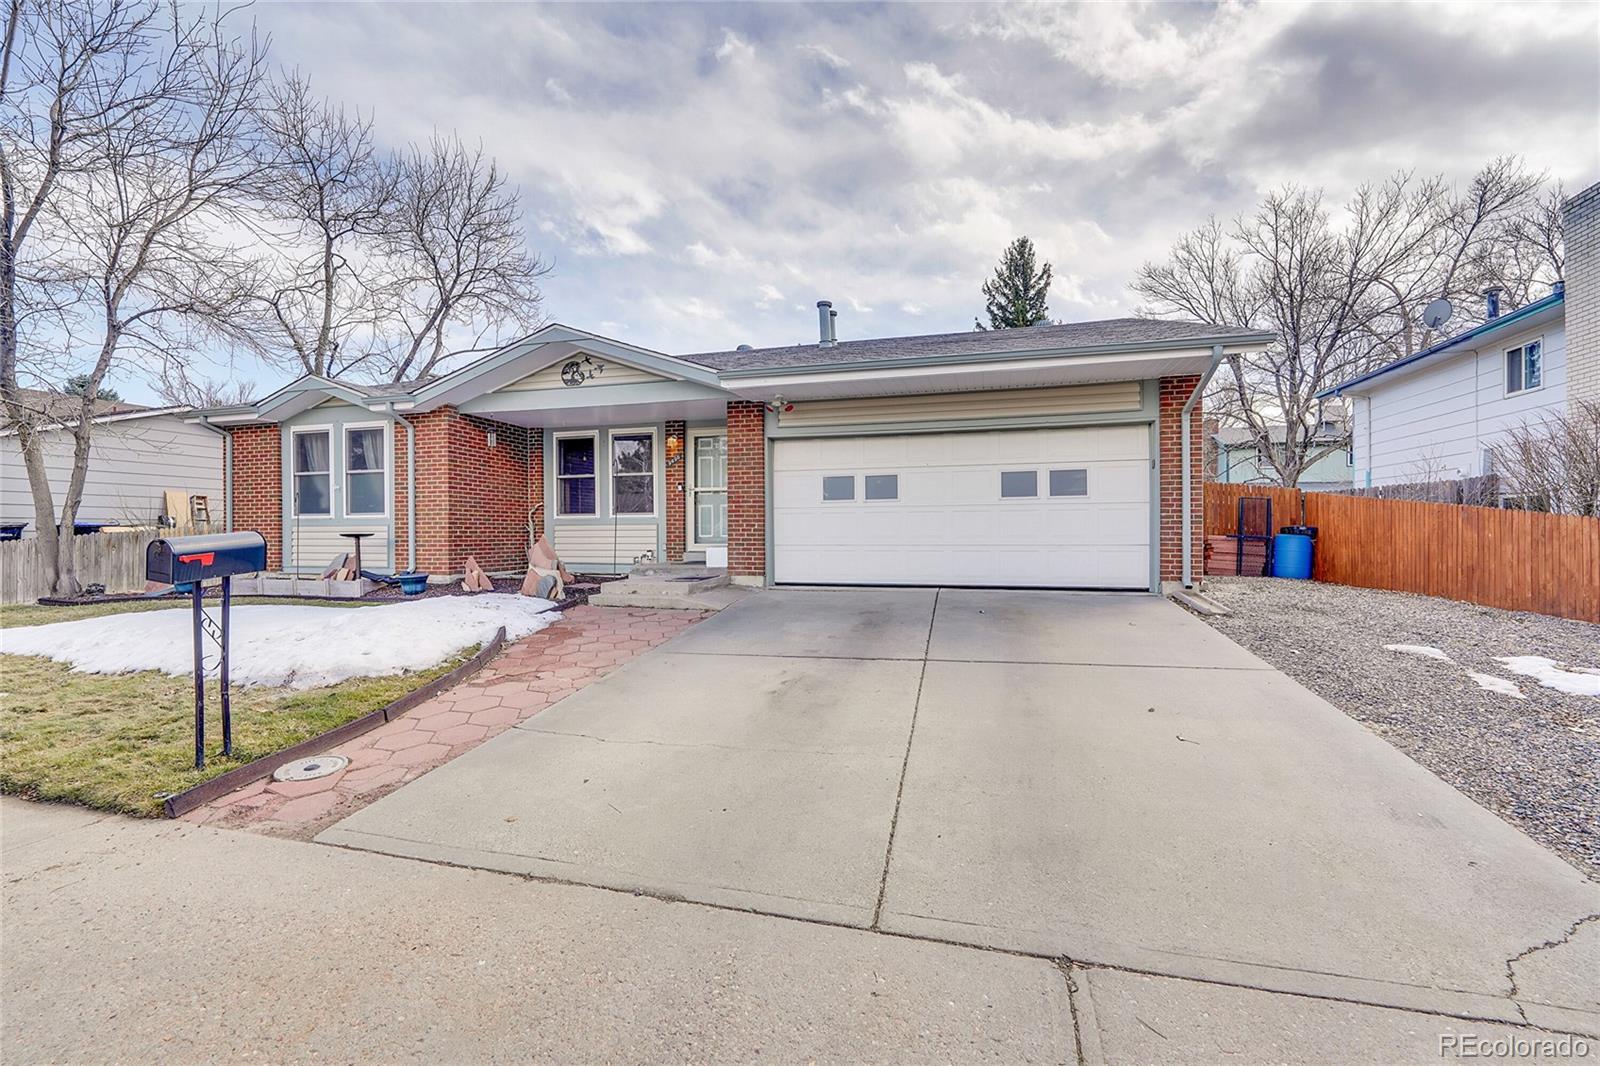 9496 w 74th way, arvada sold home. Closed on 2024-04-16 for $620,000.